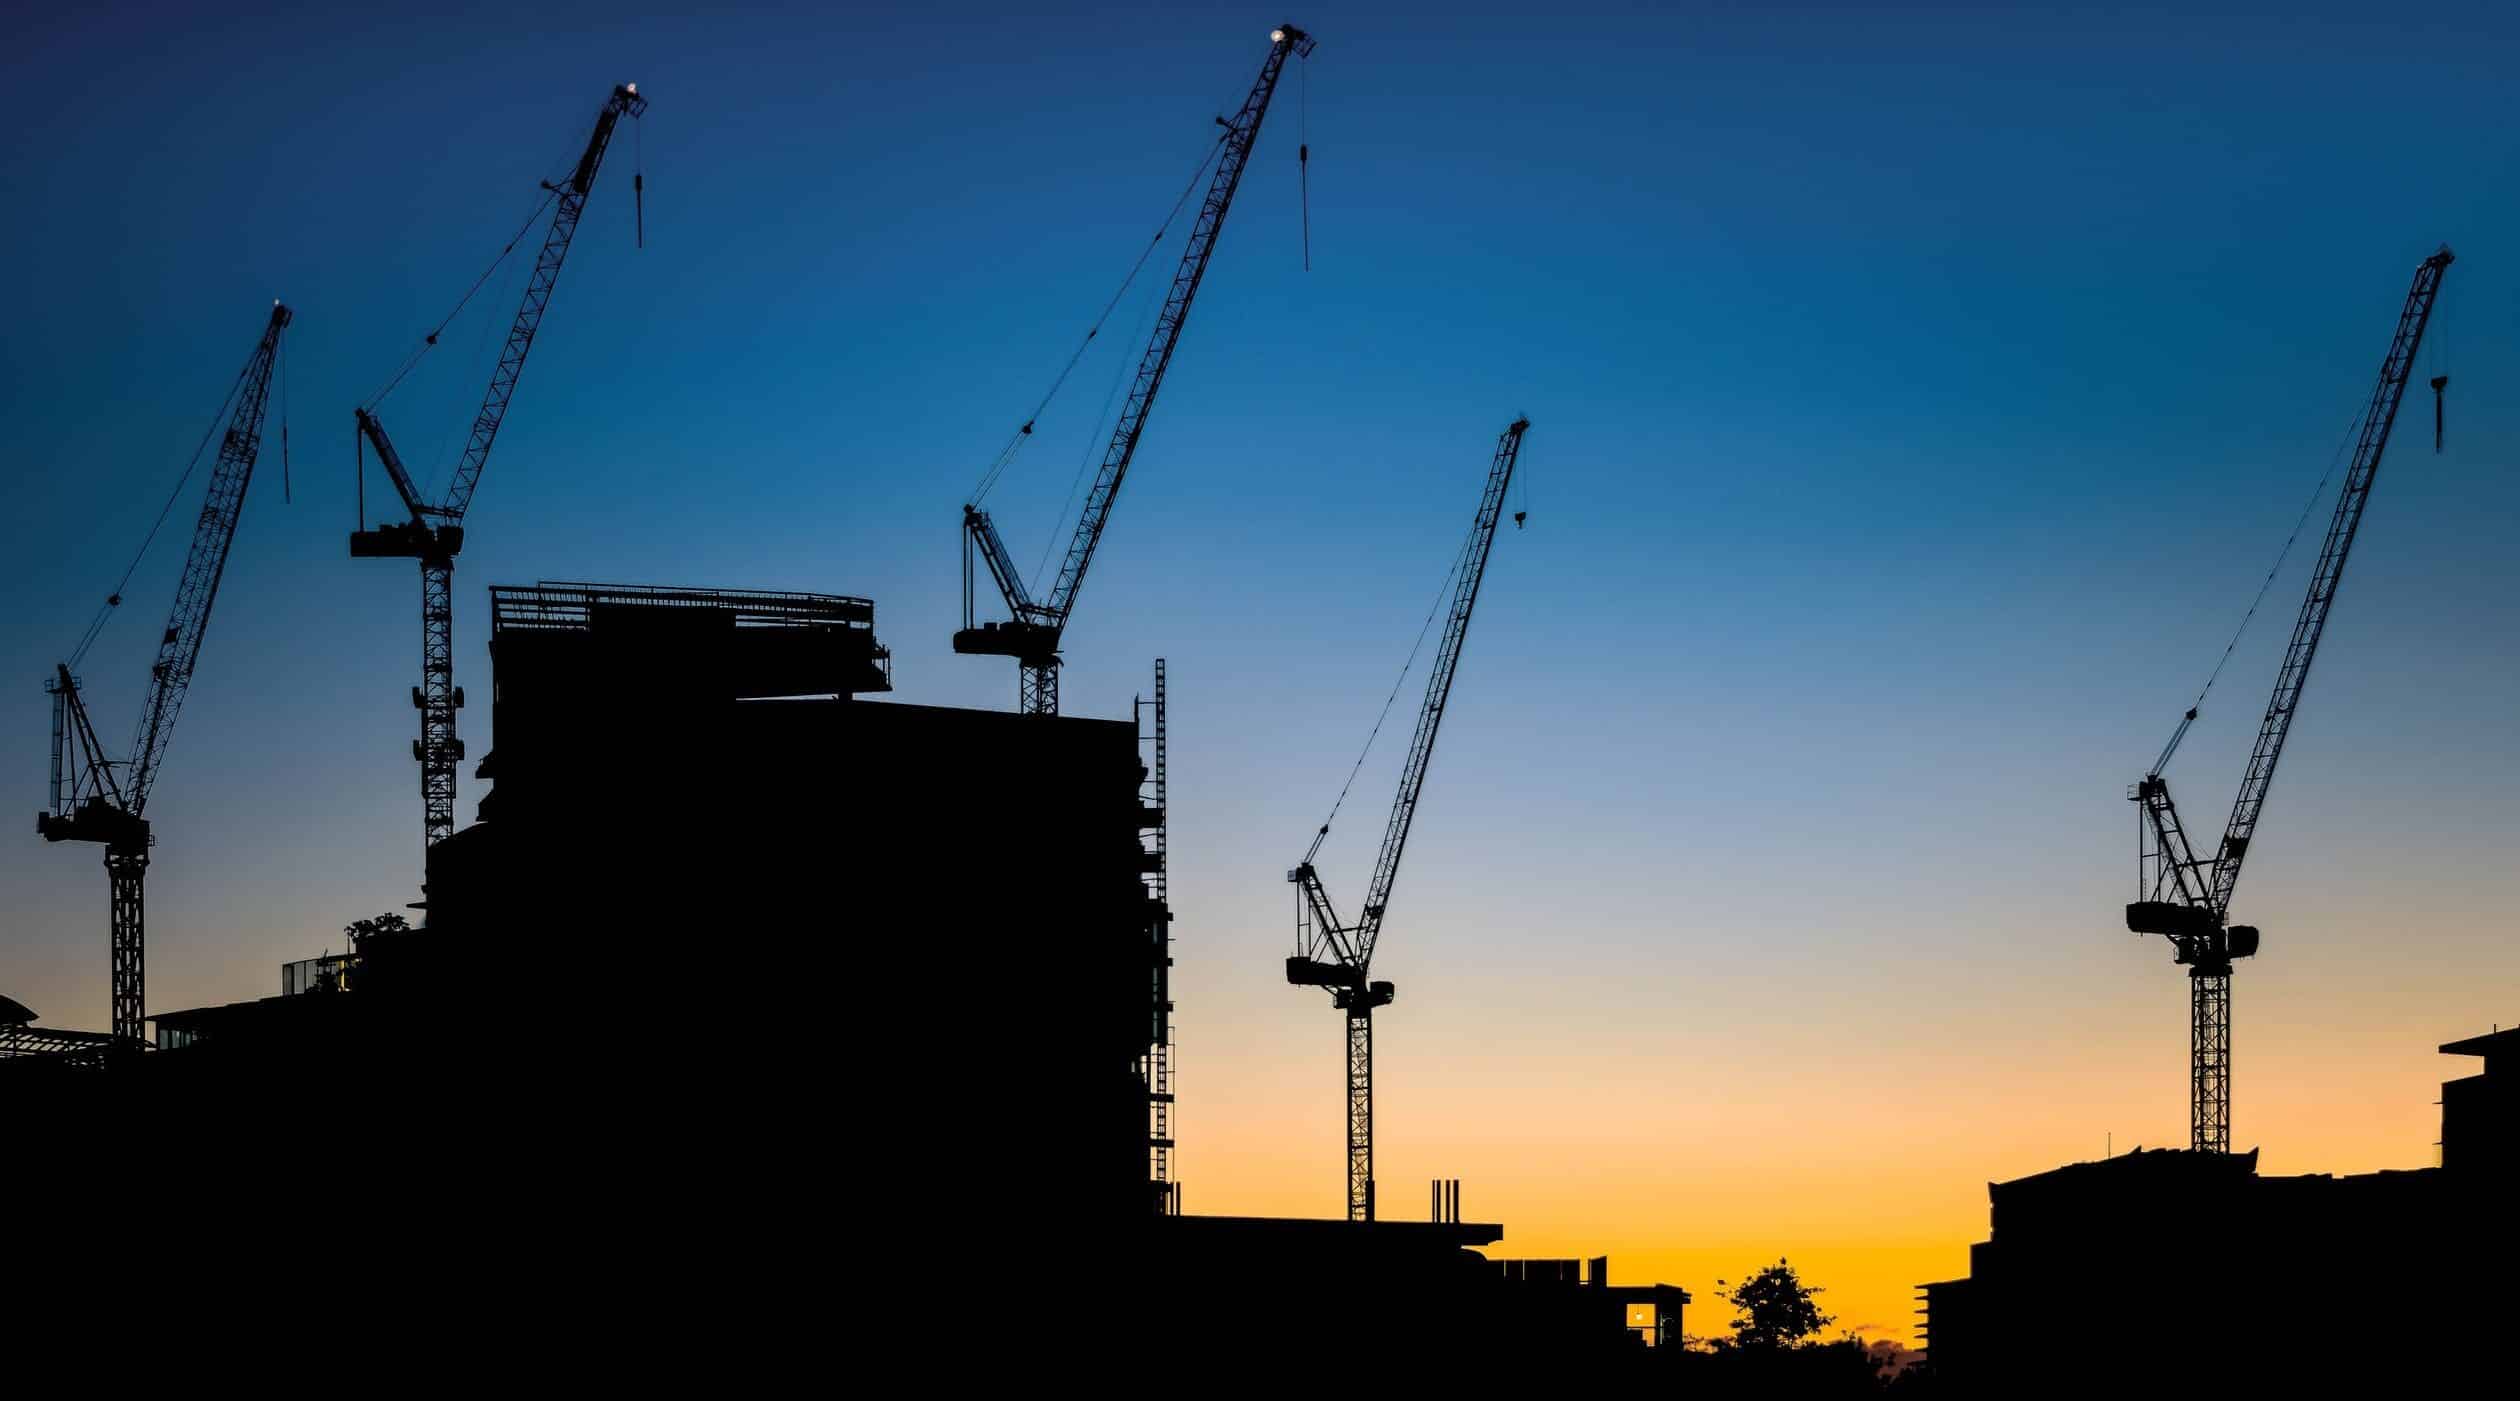 Silhouette of construction cranes at sunset.